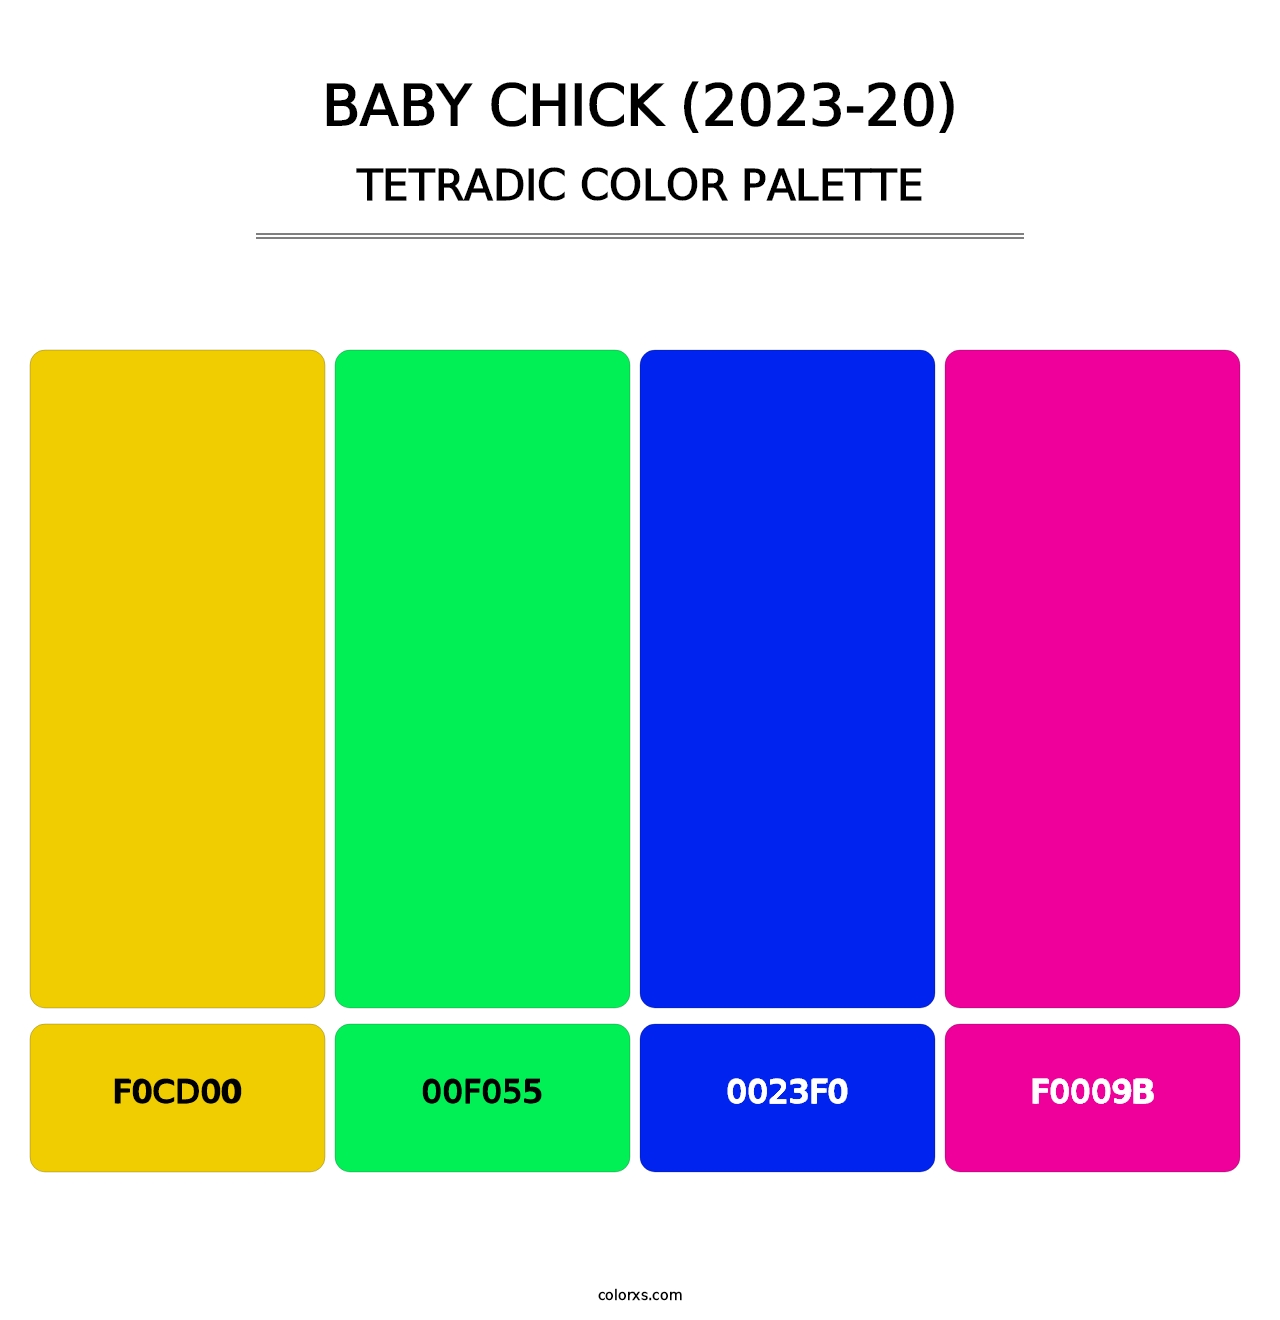 Baby Chick (2023-20) - Tetradic Color Palette